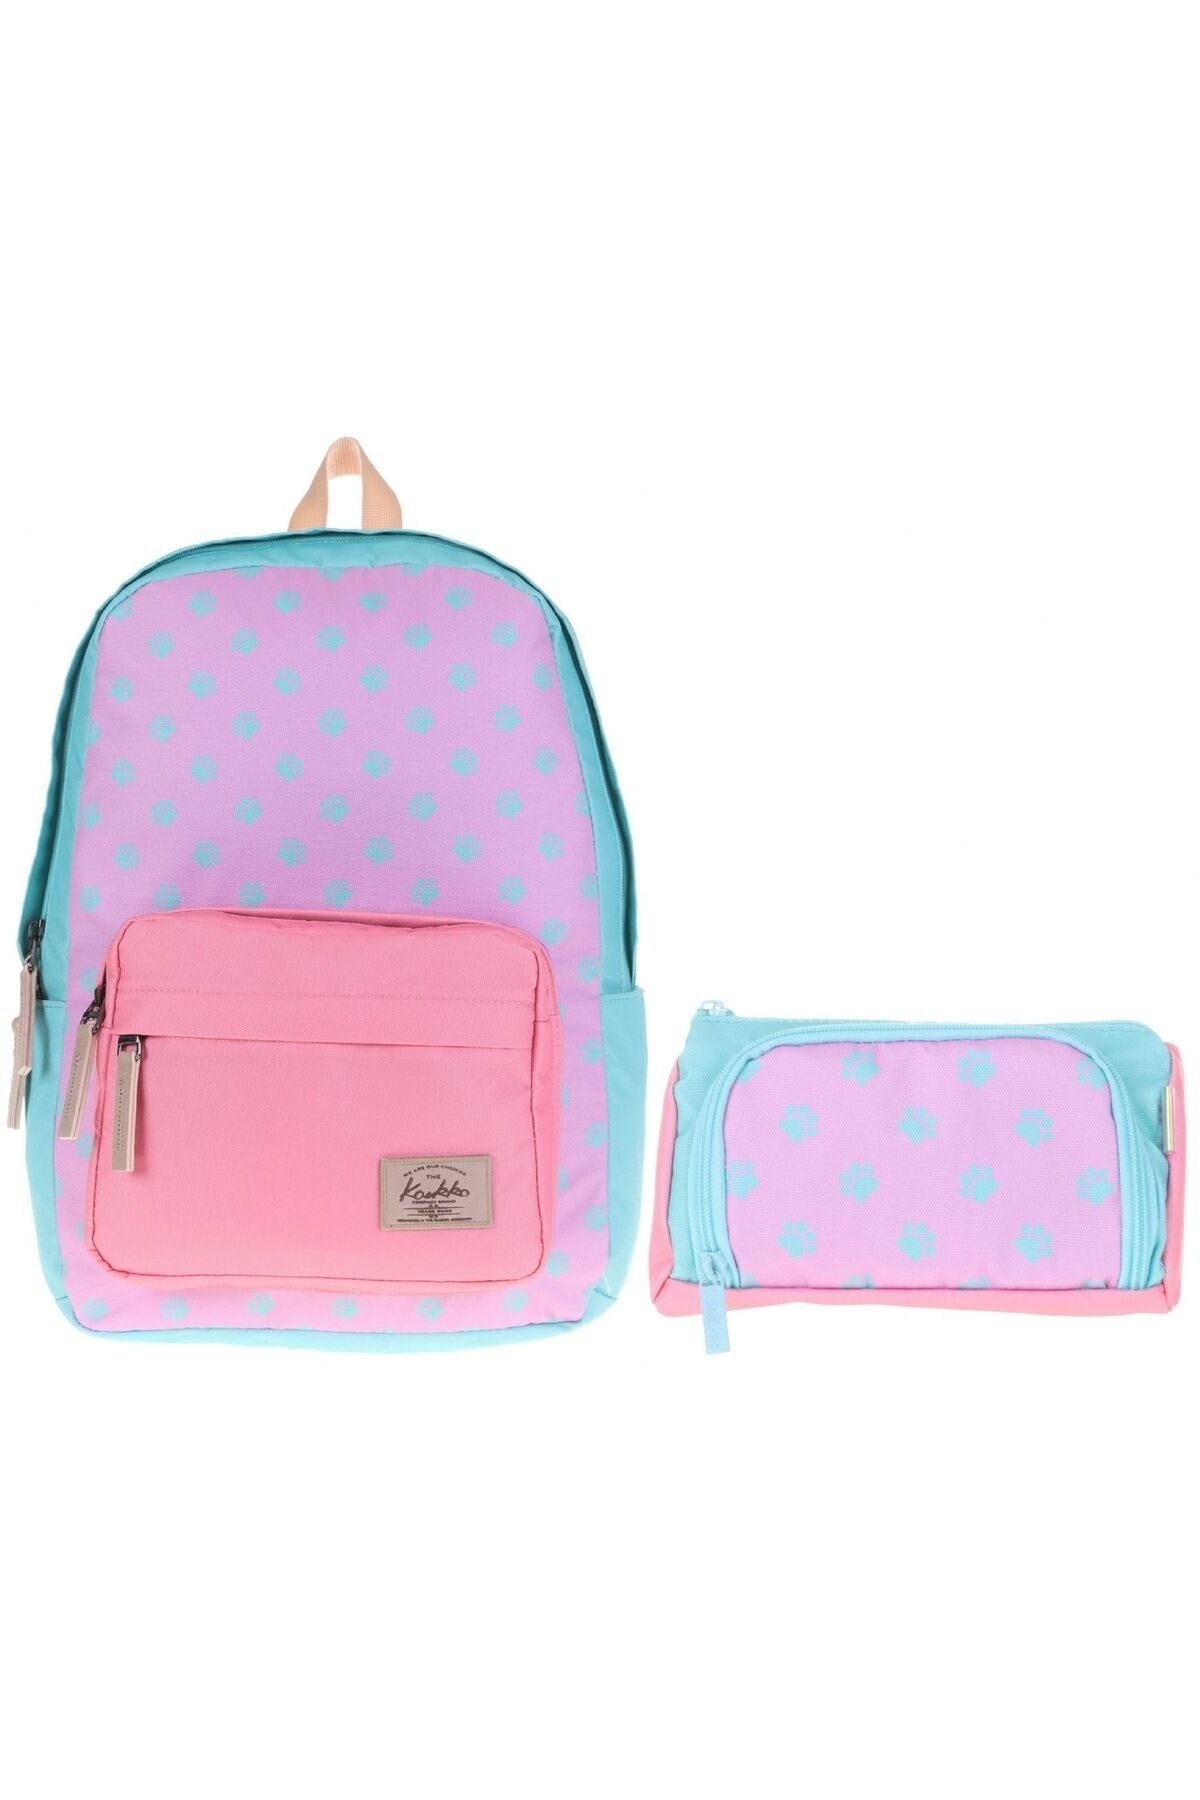 Green Pink Paws Primary School Middle School Bag and Pencil Holder Set - Girls